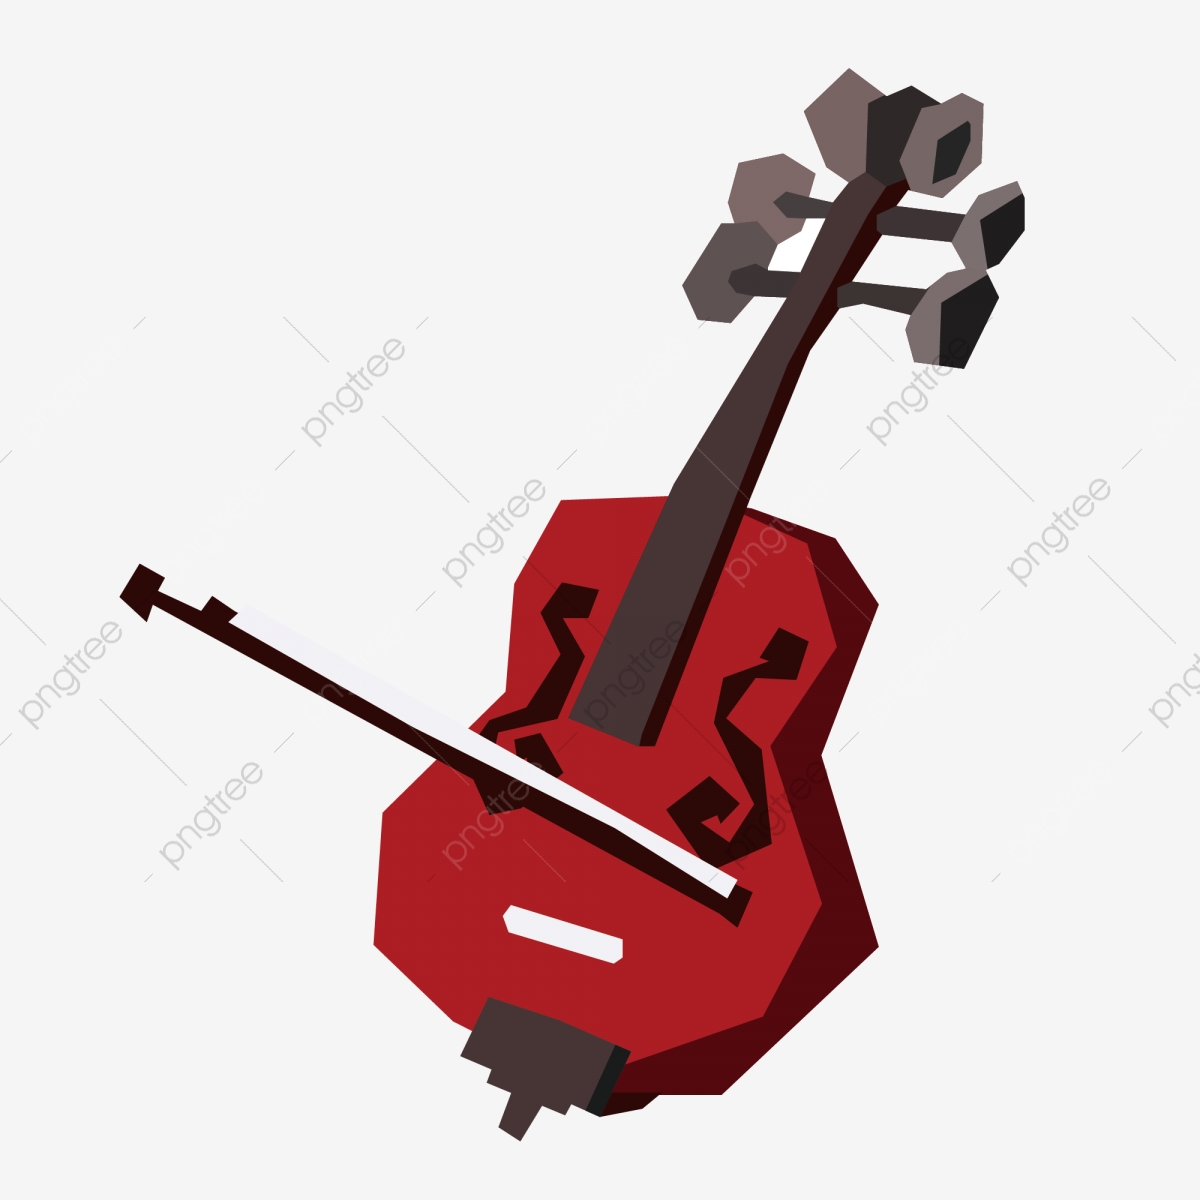 Musical Instrument Geometric Cartoon Violin Can Be Commercial.